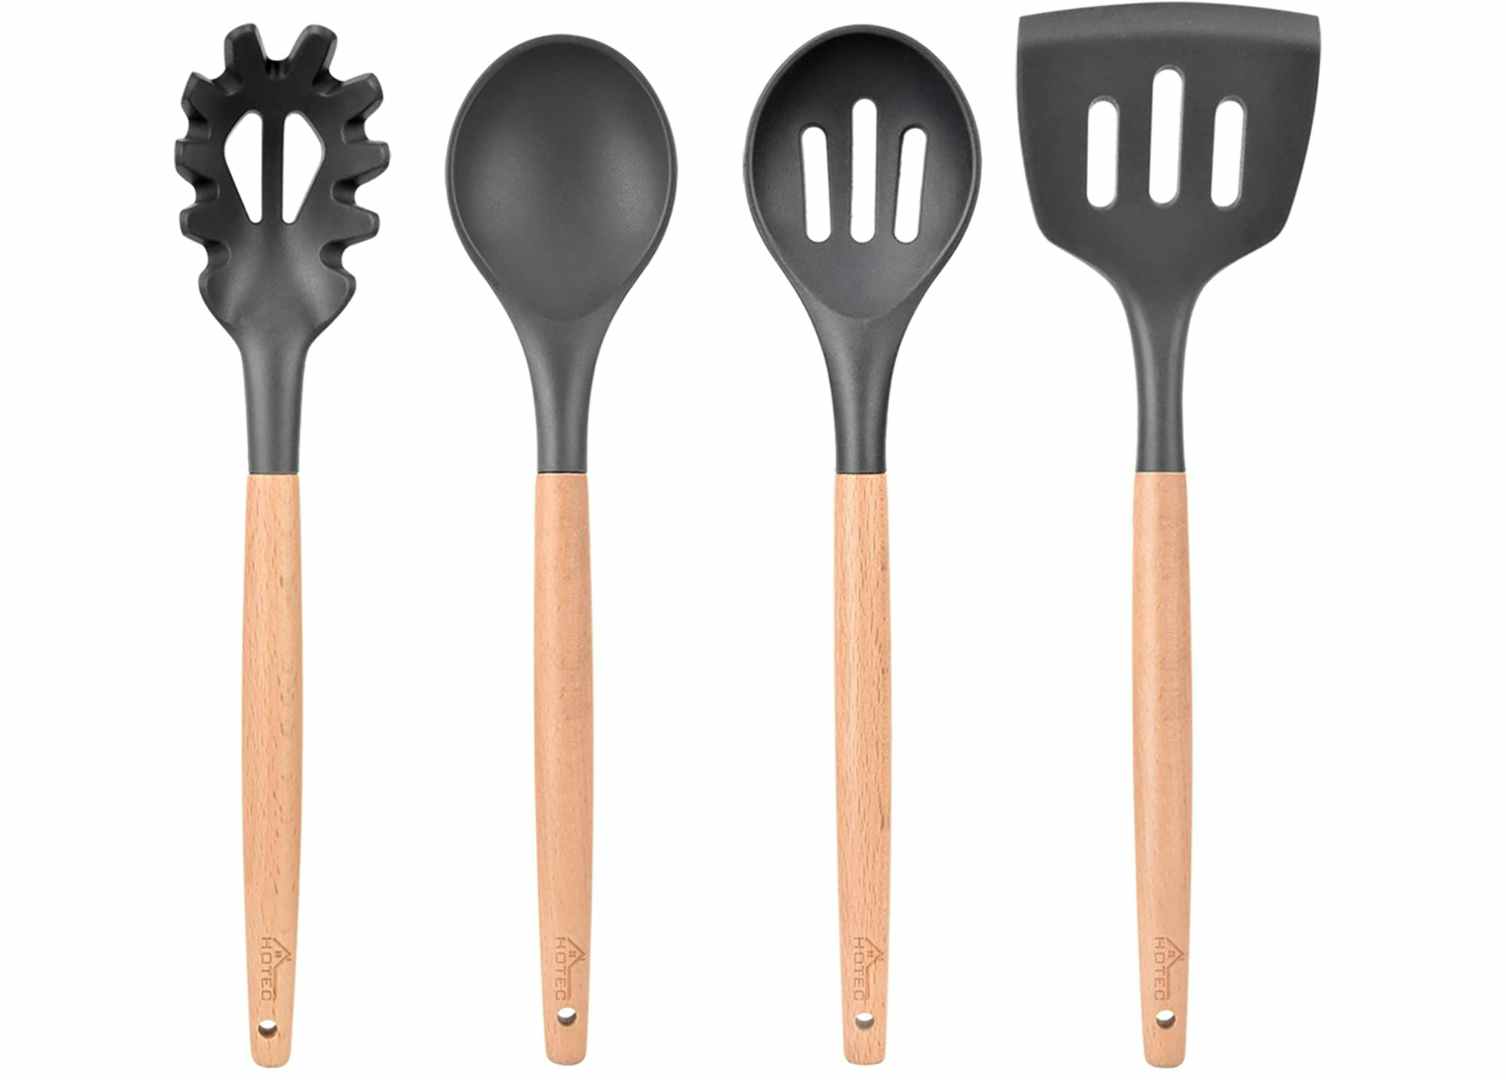  HOTEC Silicone Cooking Spatula Kitchen Utensils